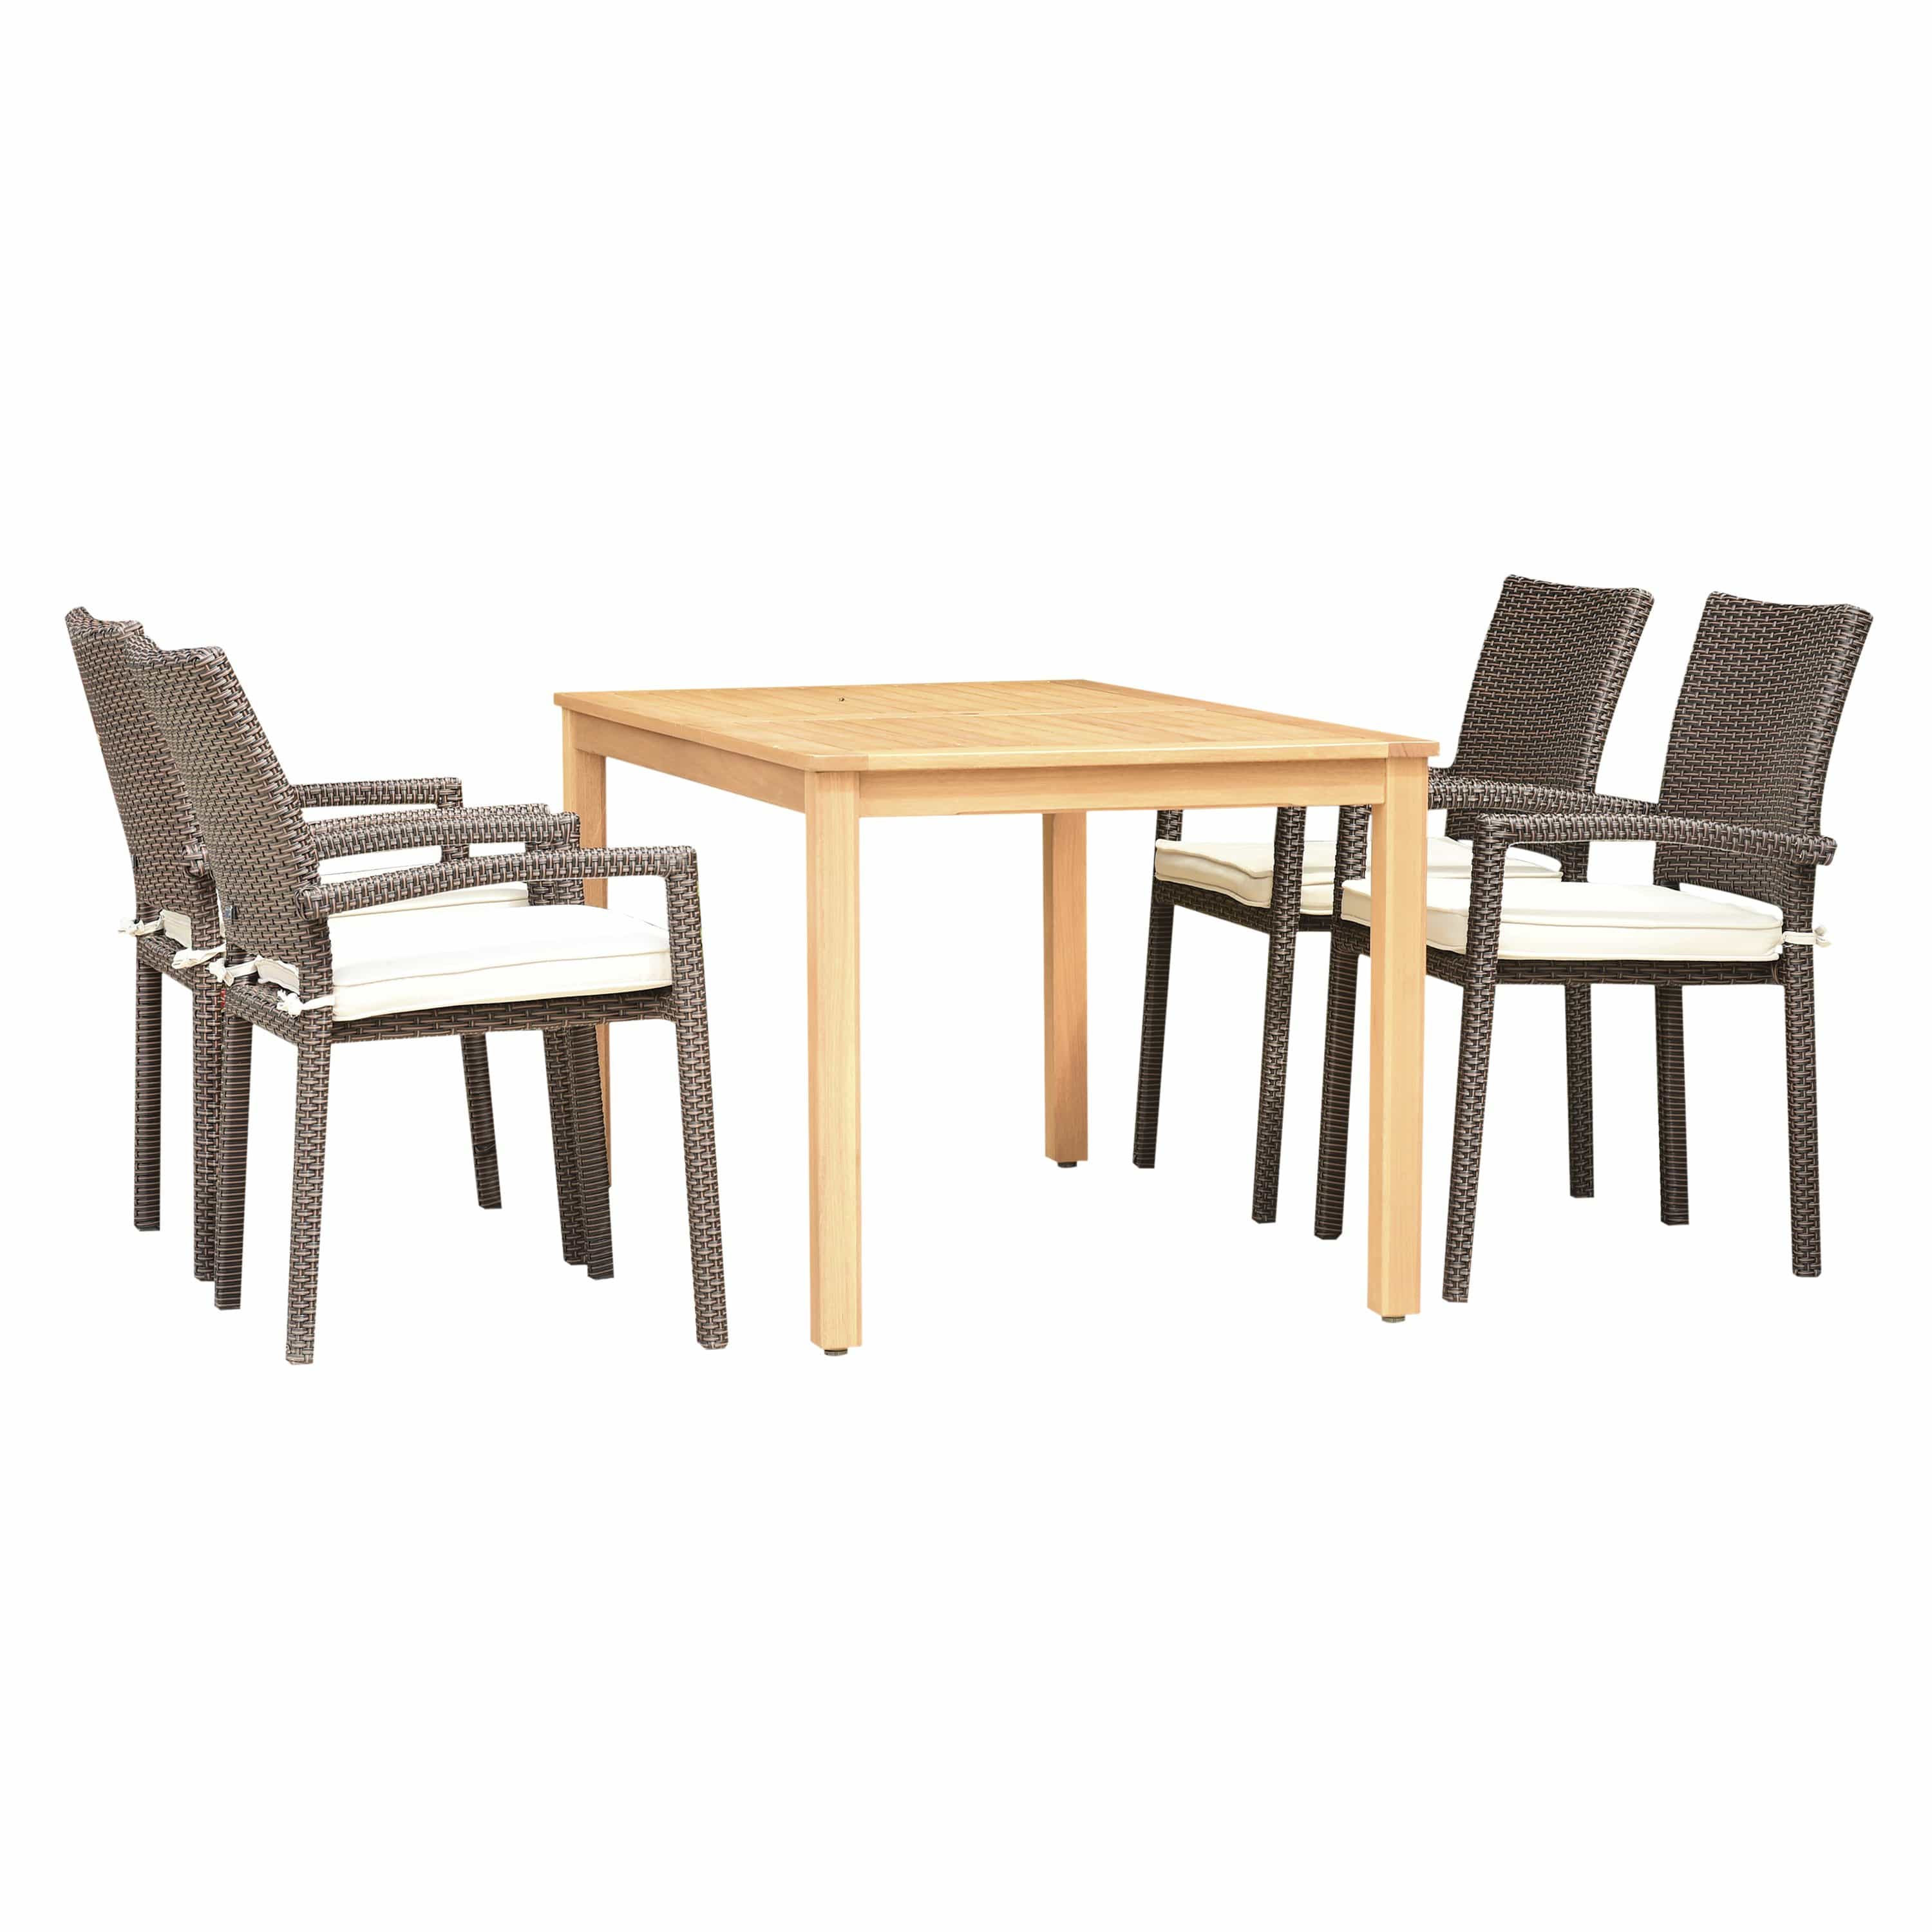 Amazonia Outdoor Teak Dining Set Amazonia Brooklyn 5 Piece Rectangular Eucalyptus Patio Dining set | Teak Finish and Grey Wicker Arm Chairs| Durable and Ideal for Outdoors